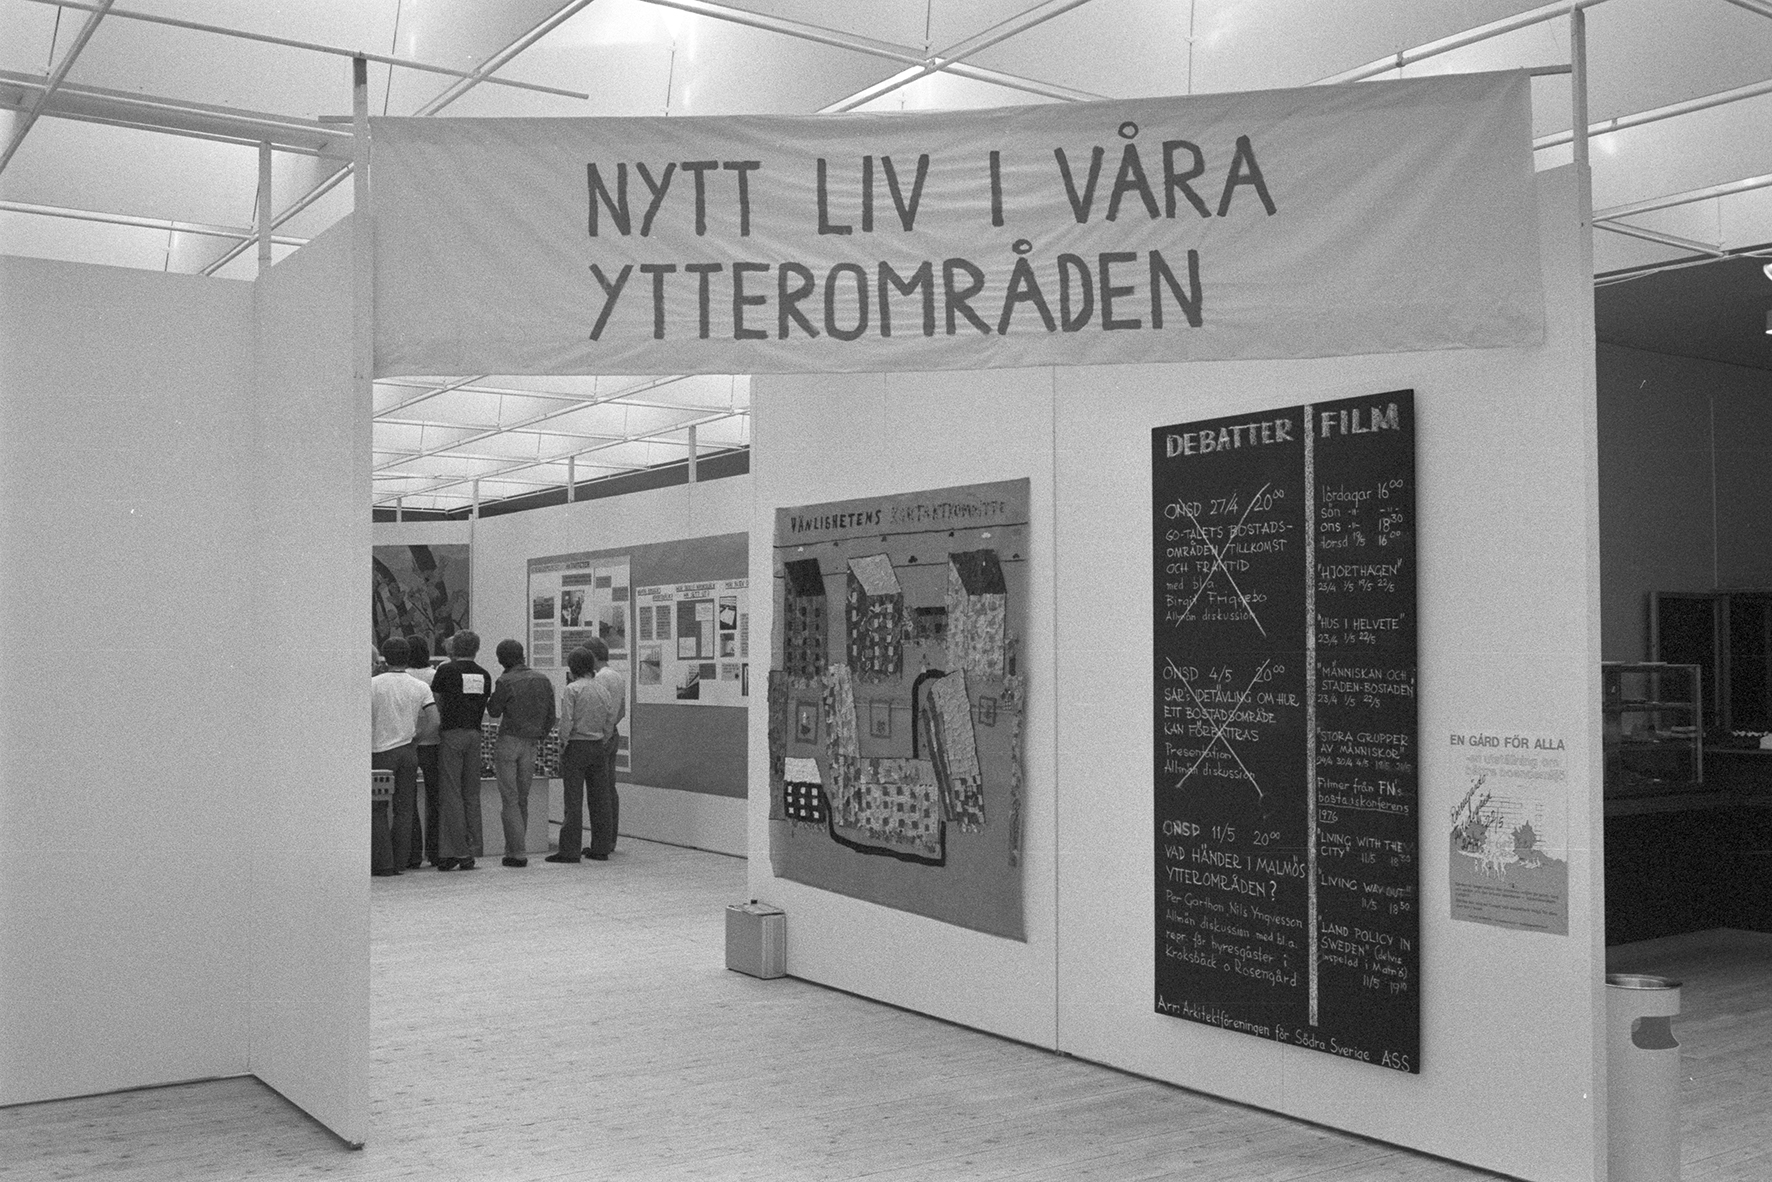 Picture from the exhibition space. A banner can be seen that reads "New life in our outlying areas". A number of visitors can be seen standing close to each other looking at something out of sight.